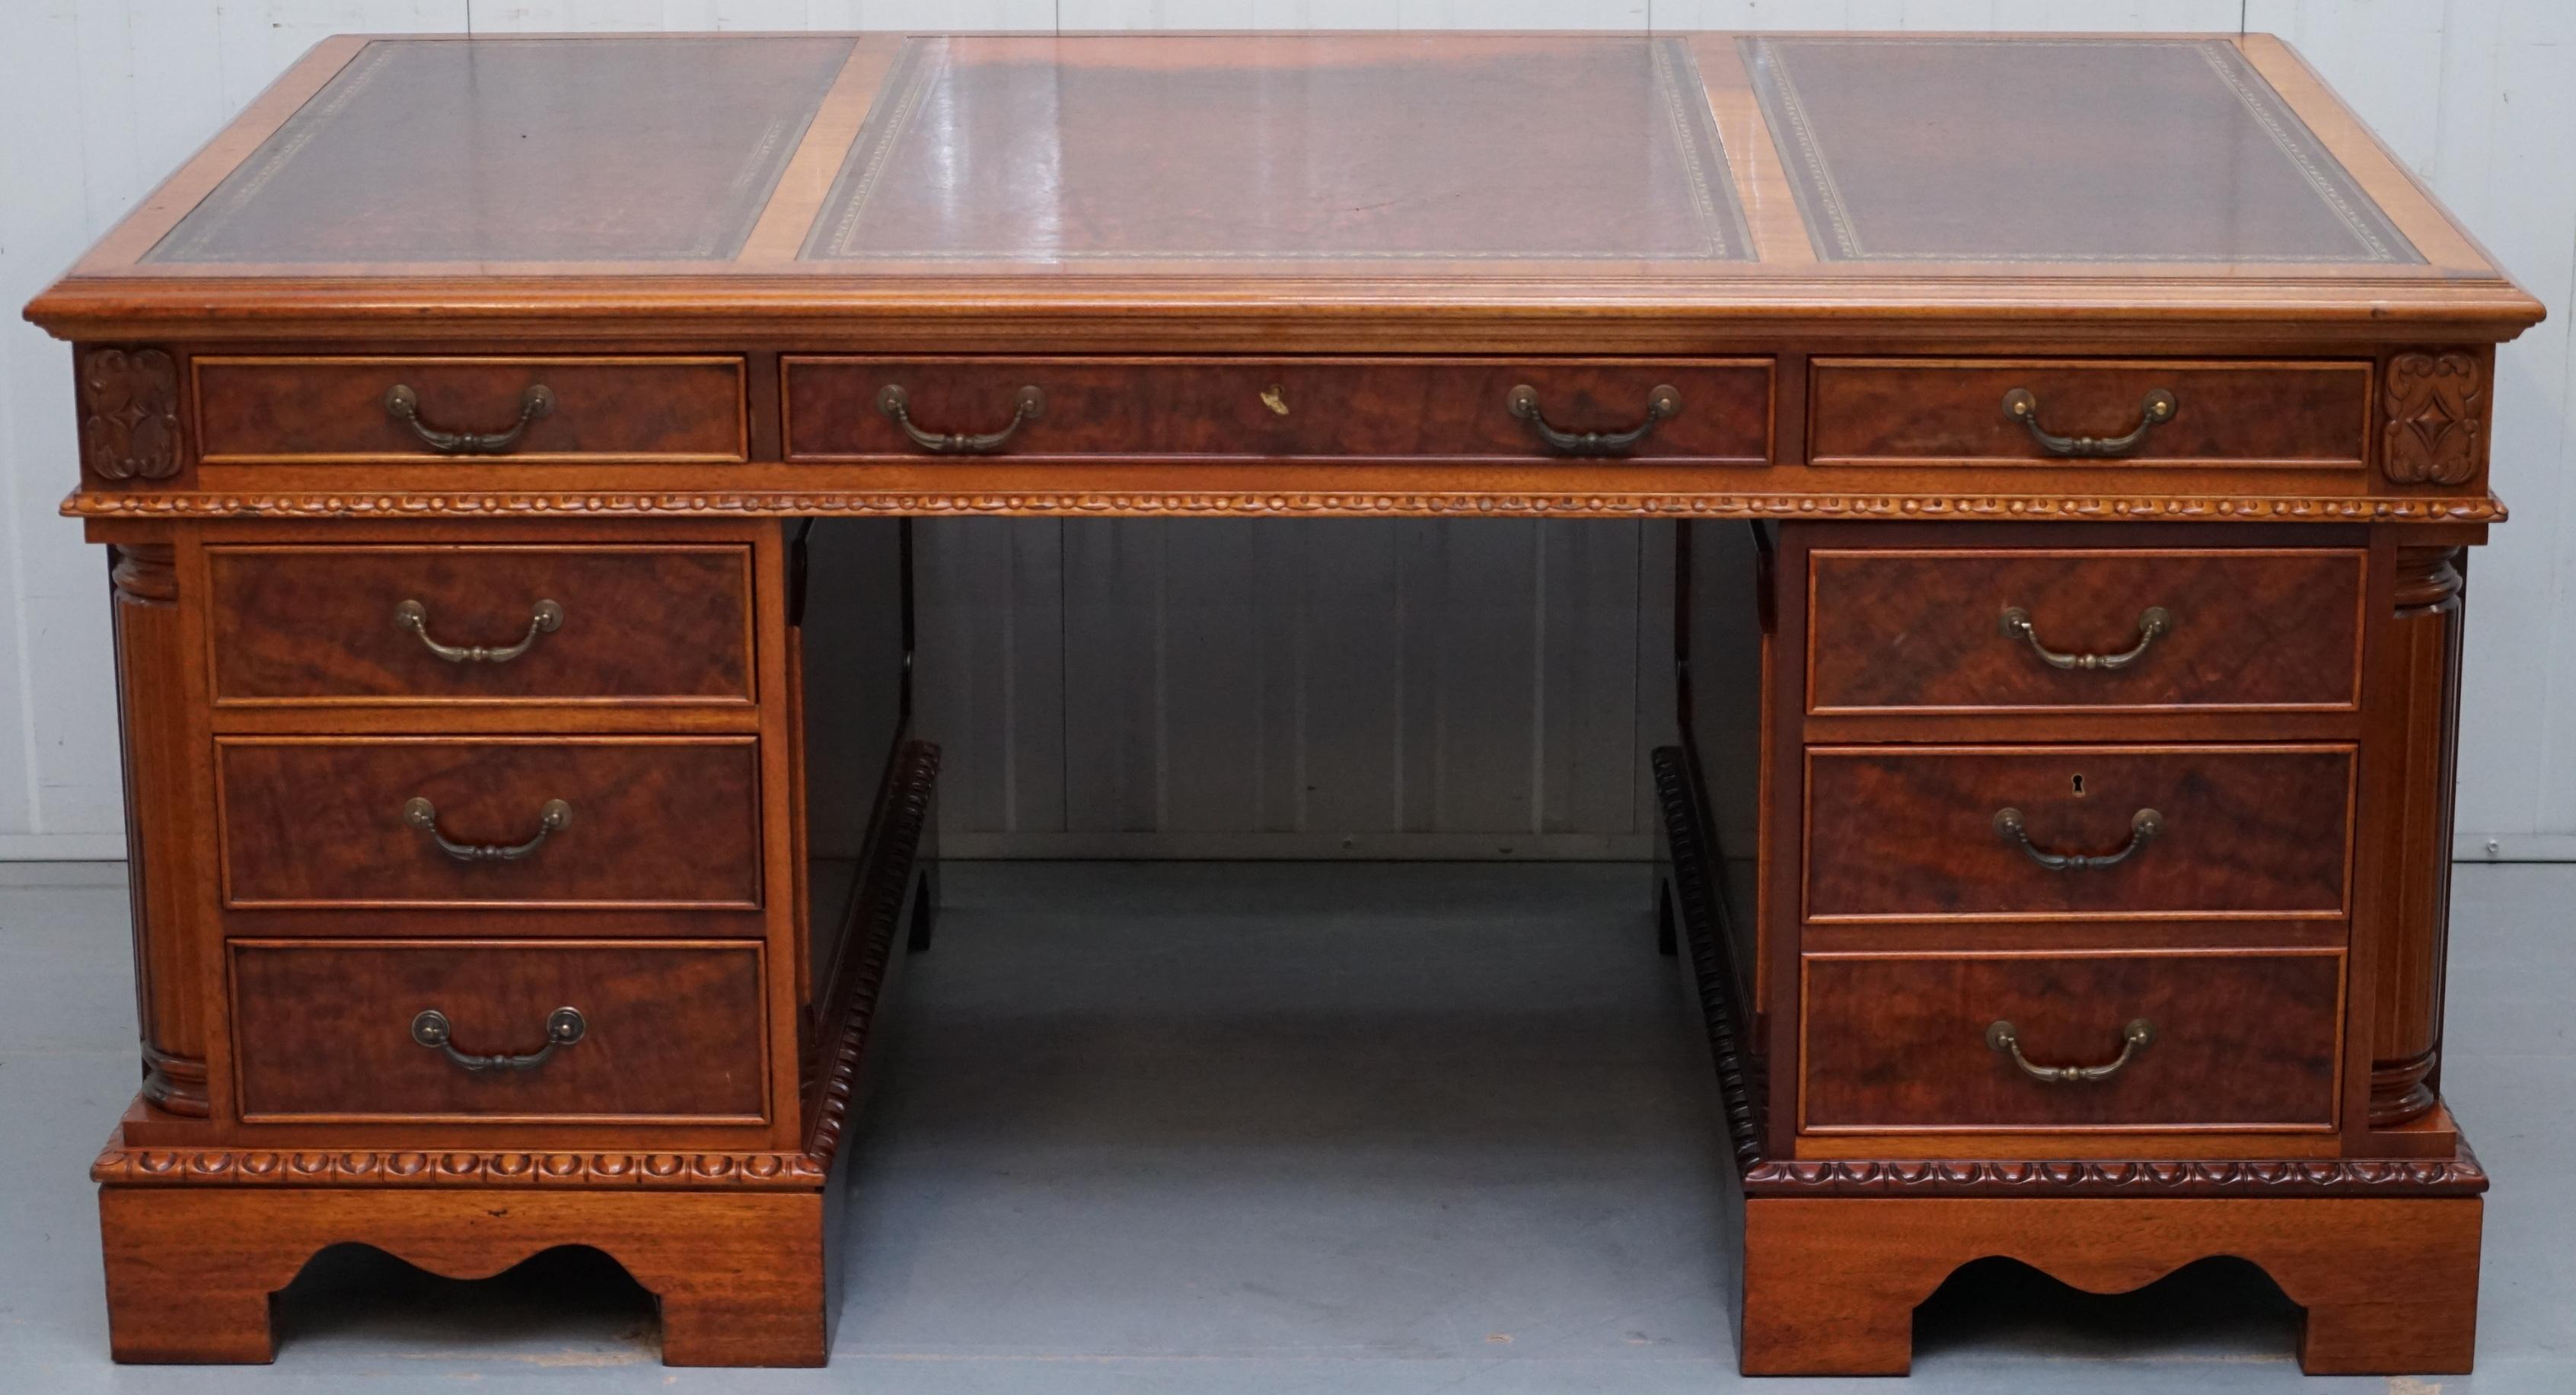 We delighted to offer for sale this stunning burr and flamed walnut large 16 drawer double sided twin pedestal partner desk for two people to share

A very heavy well made luxury twin partner desk, based on the original idea of two legal partners